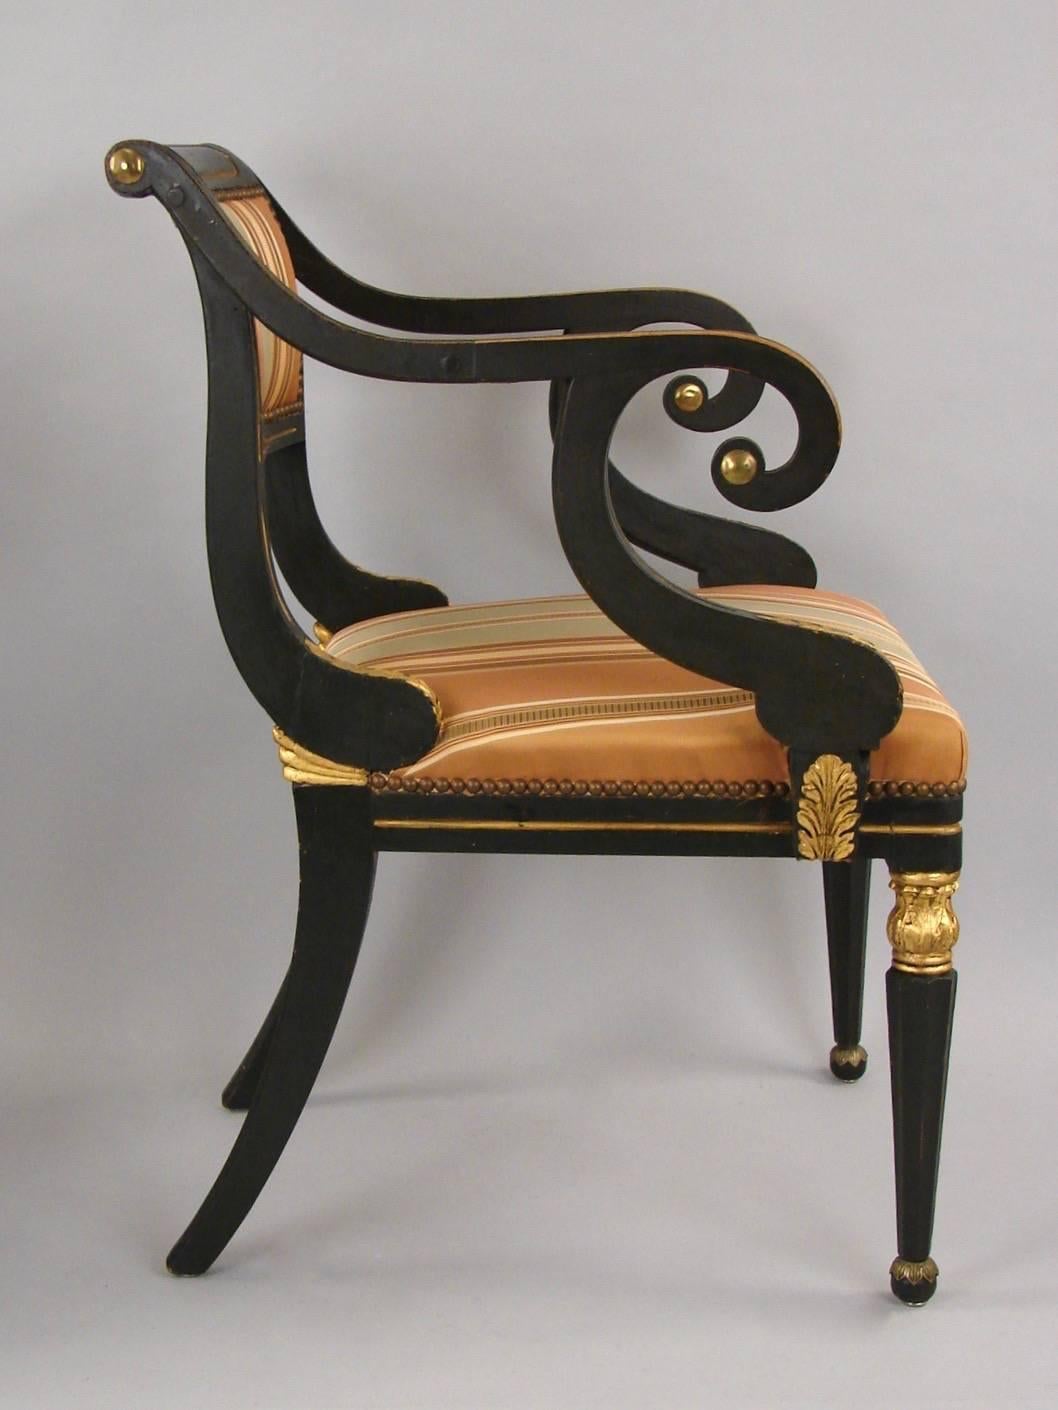 A pair of Regency green painted and parcel-gilt open armchairs, the scrolled arms over faceted front legs with acanthus leaf details, circa 1815. Now upholstered in striped silk fabric.

 